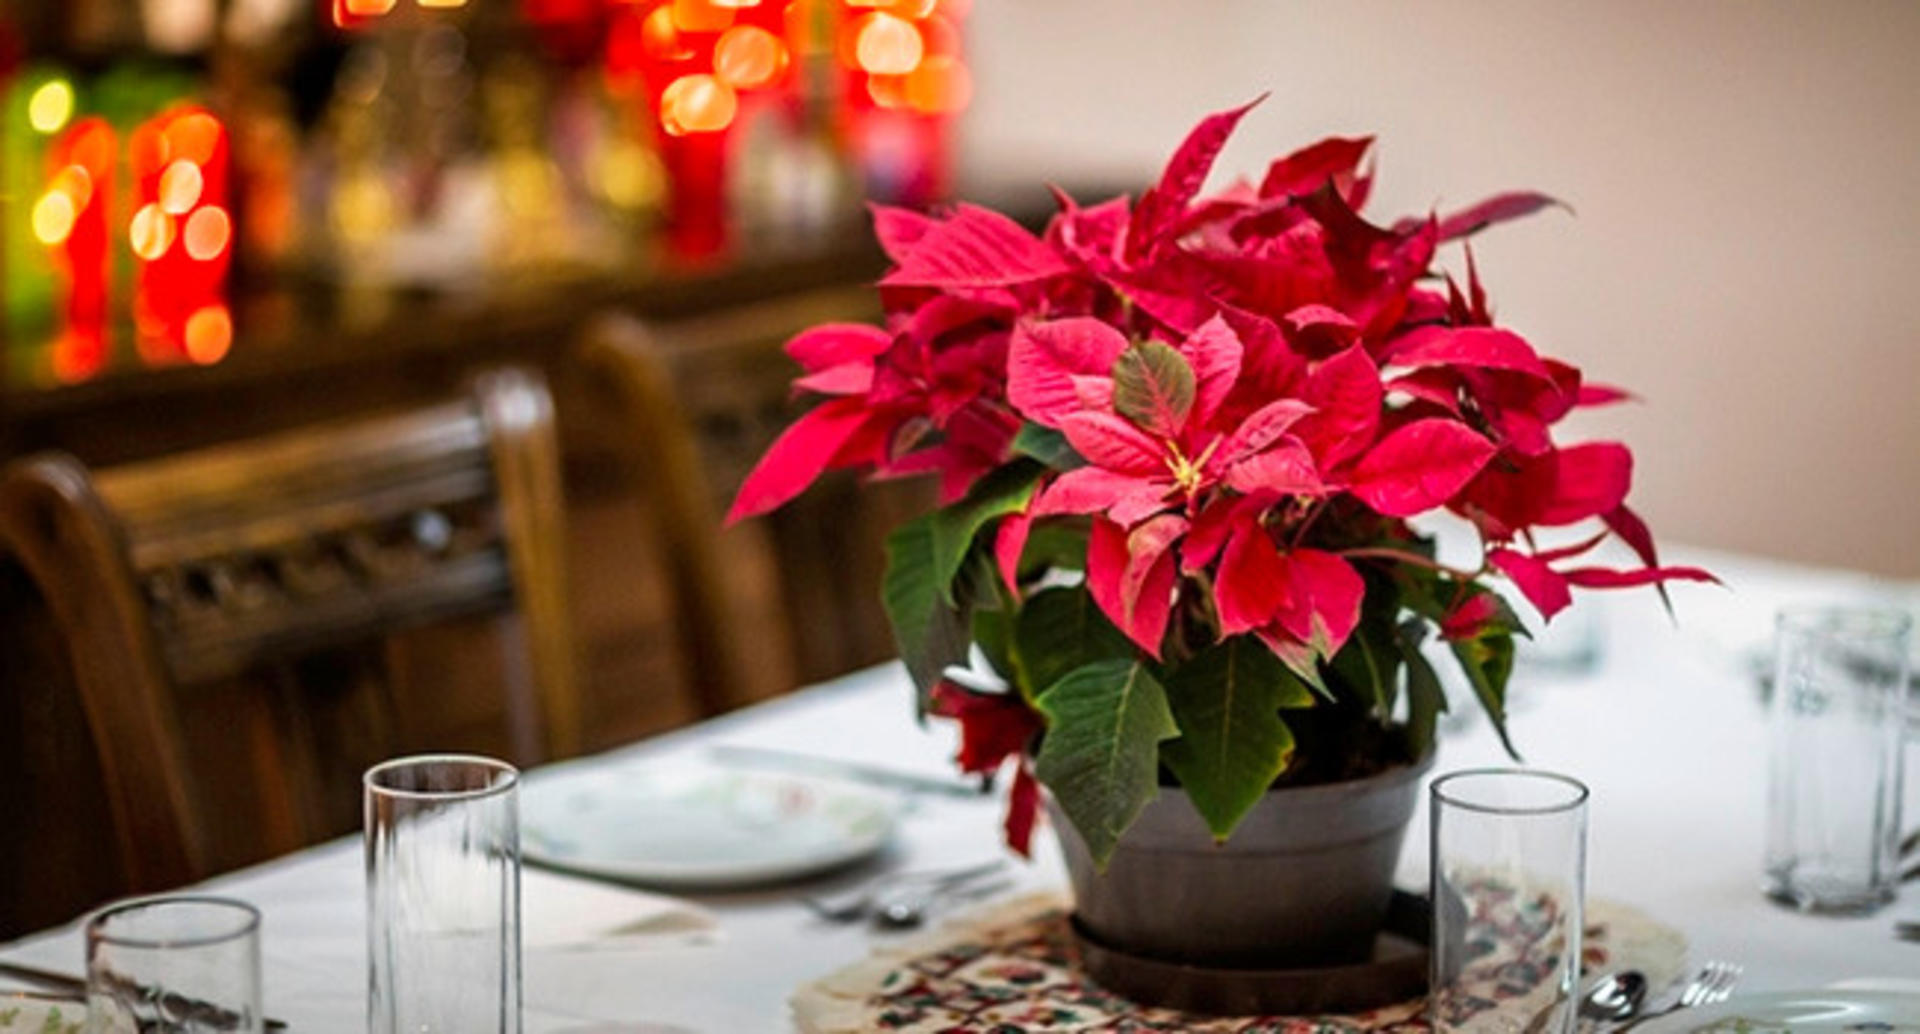 A poinsettia in a pot on a set table